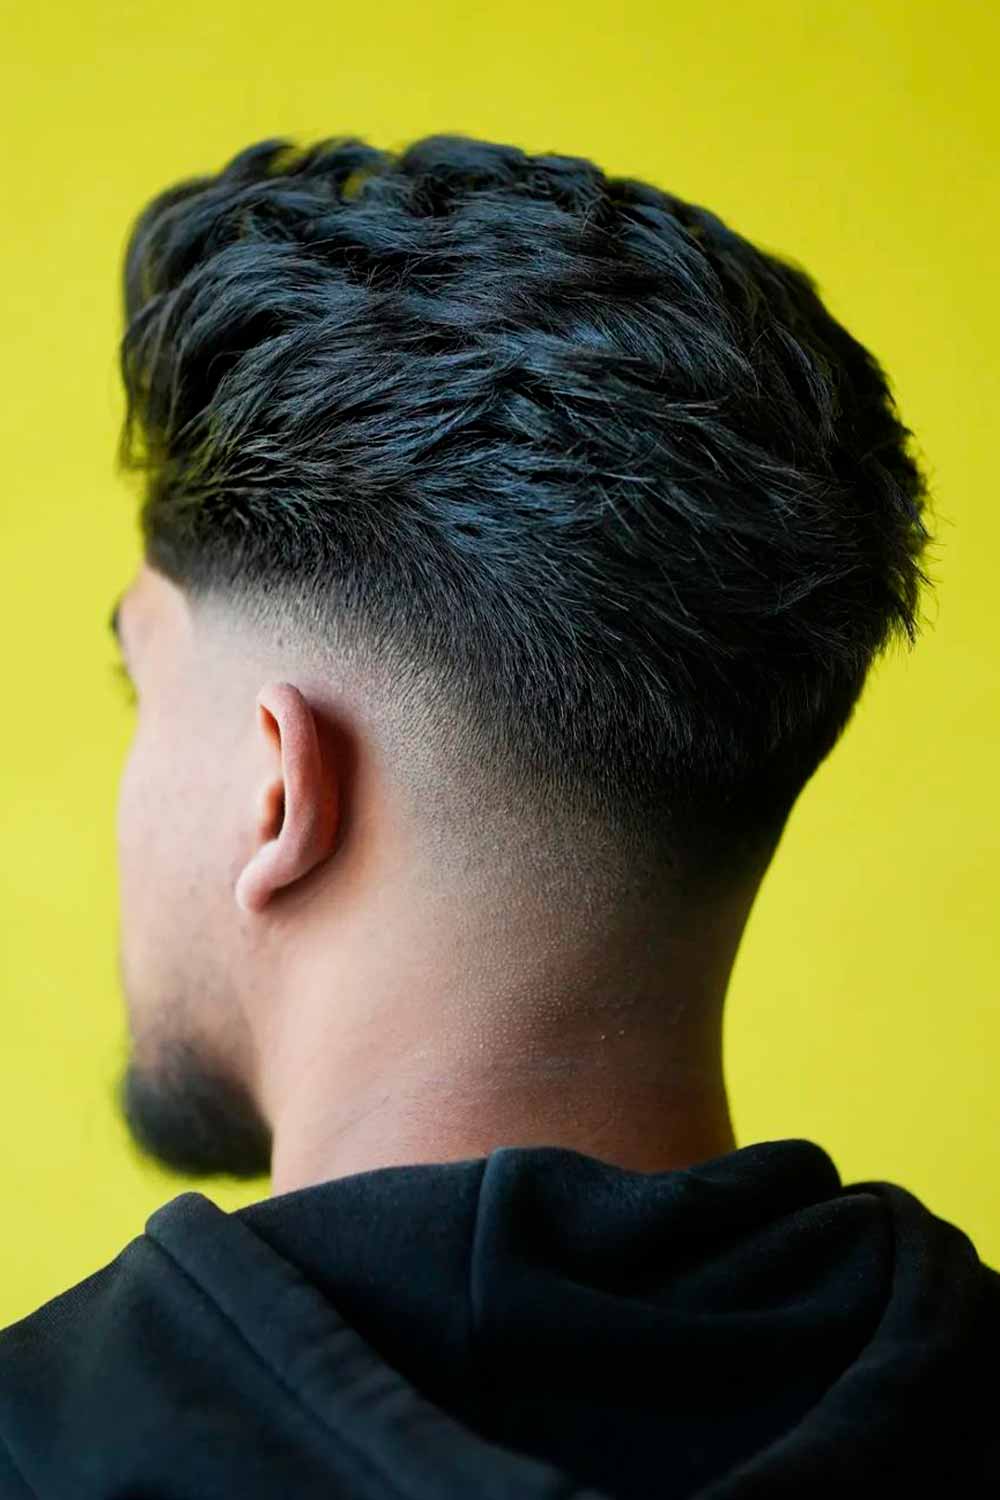 16 Best Burst Fade Haircuts for Men in 2022 - Next Luxury